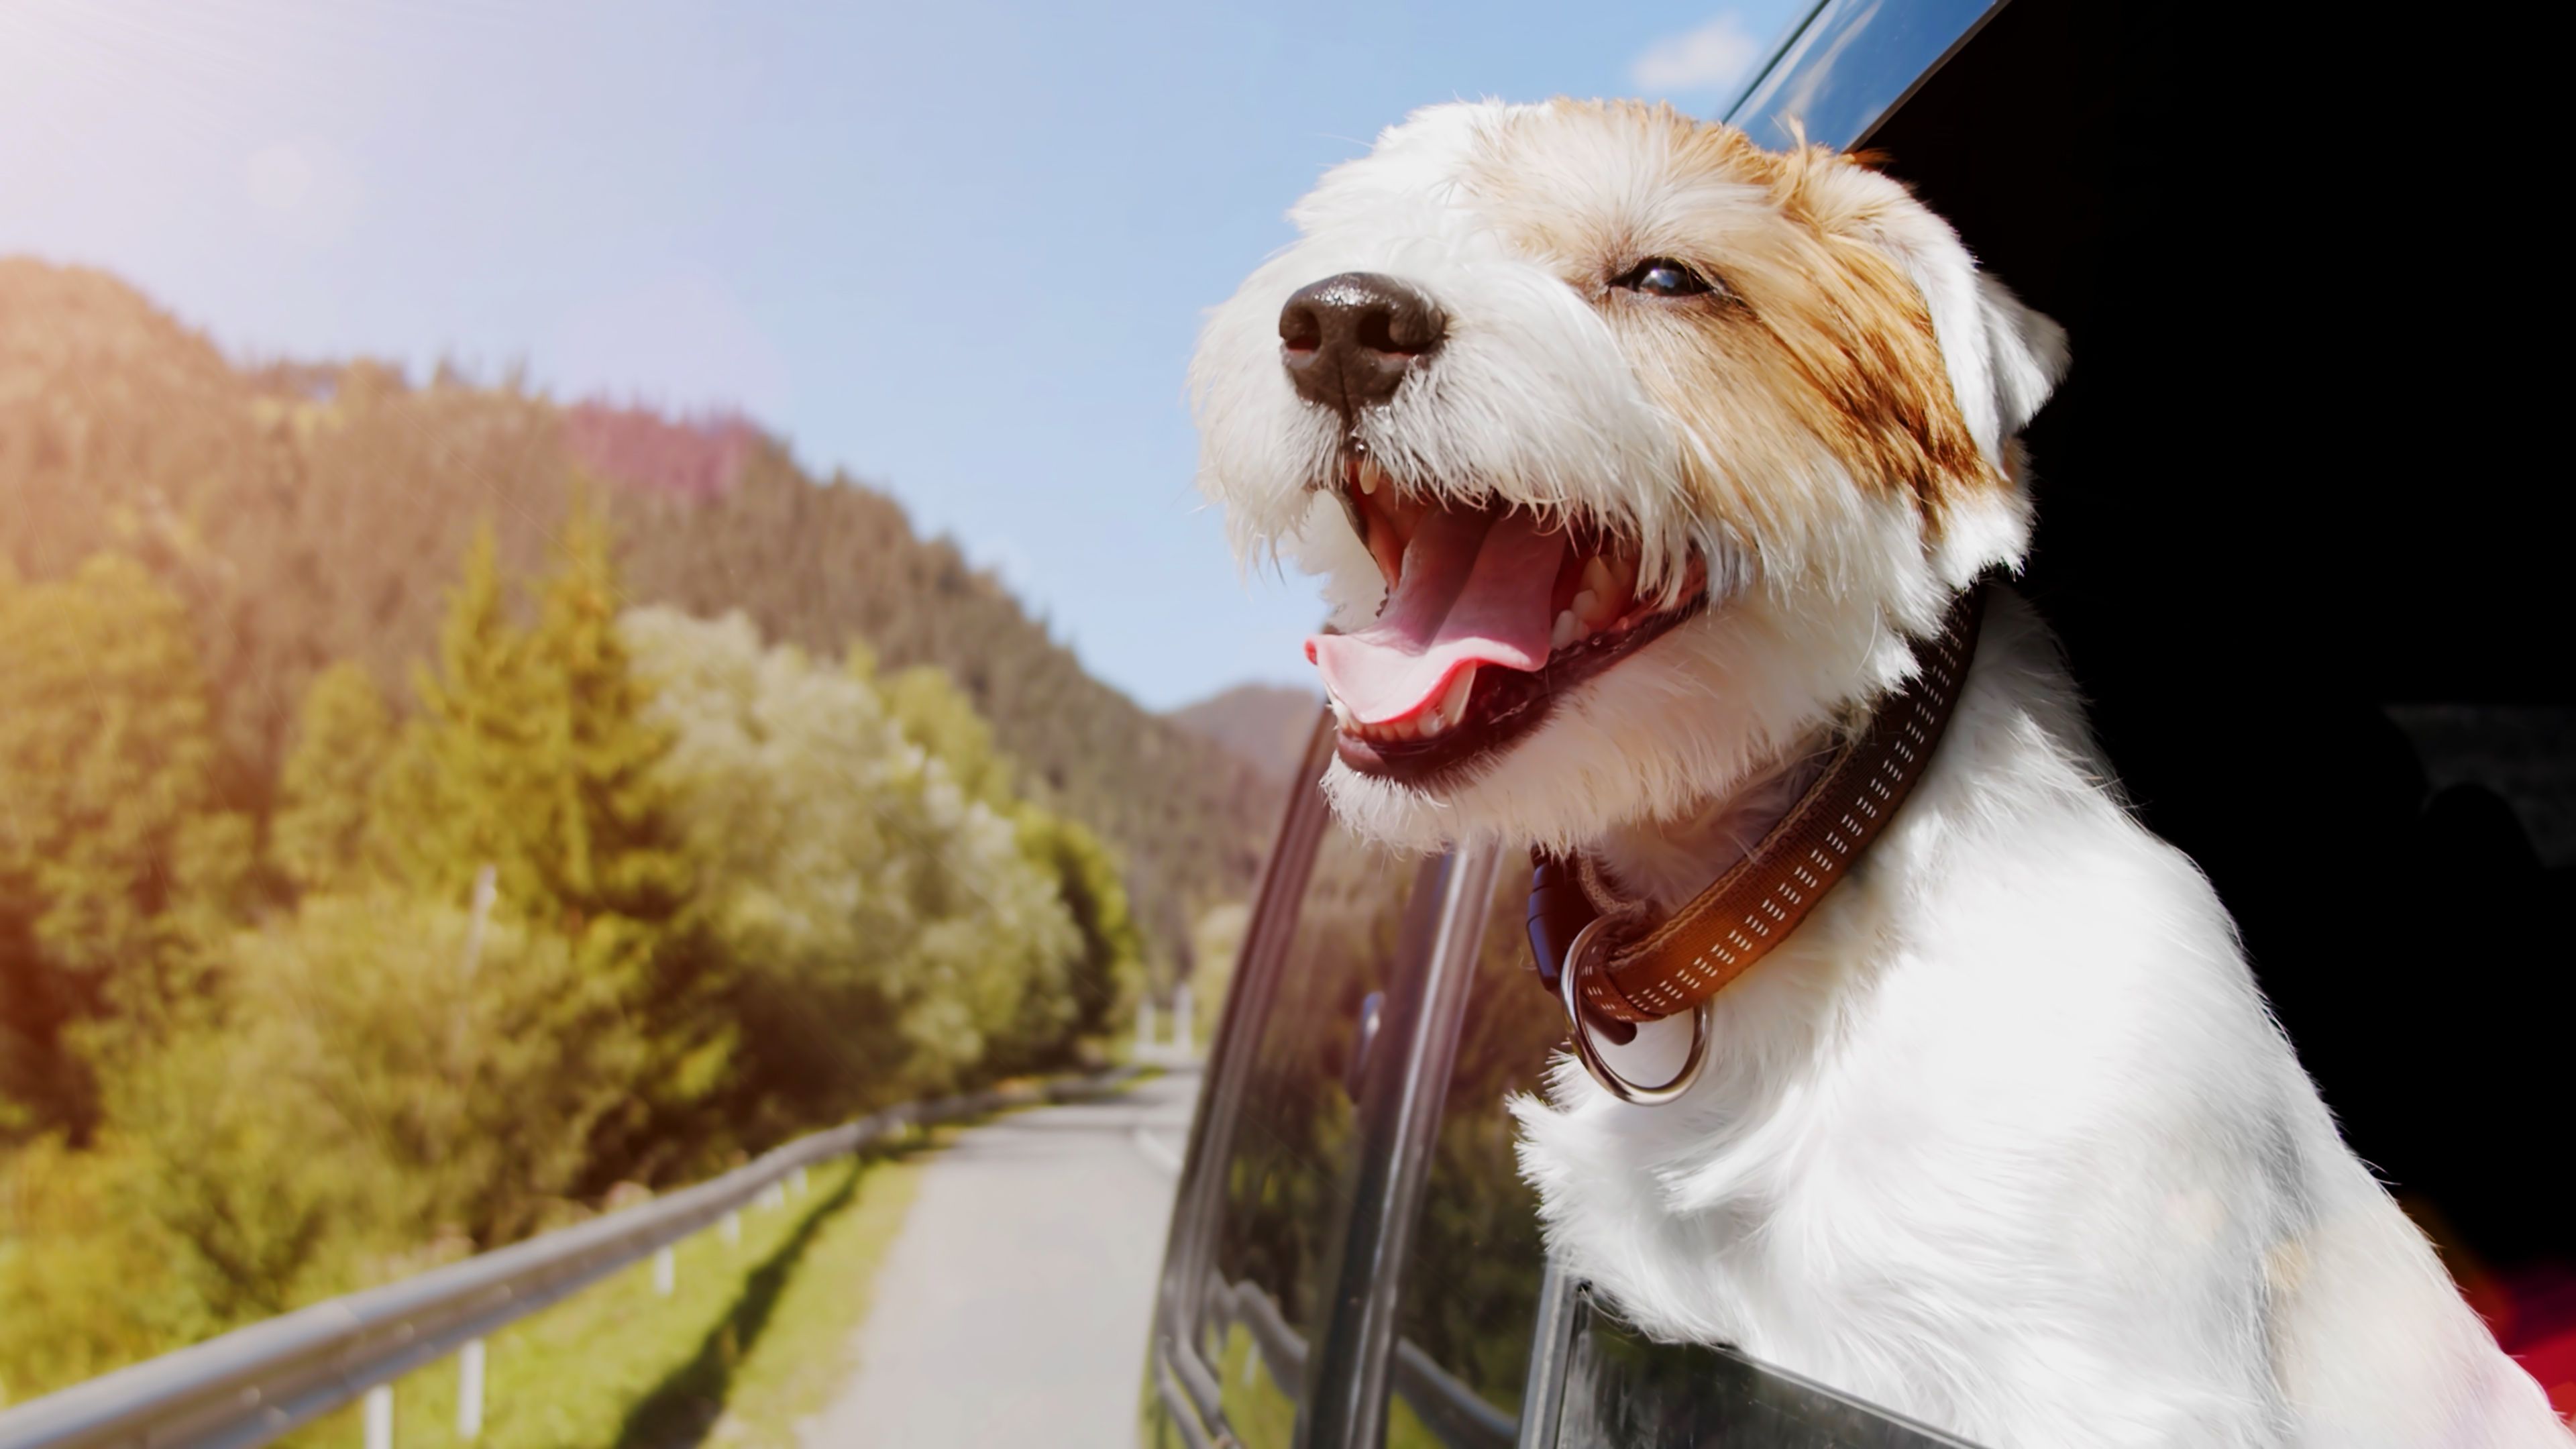 <p>Many <a href="https://www.sofi.com/learn/content/best-way-to-rent-a-car/">rental car companies</a> charge exuberant fees for bringing along a pet. And if you don’t disclose you’re bringing a pet to avoid the fees, you could end up getting charged even more if they find dog hair or any accidents when you return the car. The cheapest way to travel with a dog is often to bring your own car, if possible. And if it isn’t, you may want to ask a close friend or family member if you could borrow theirs for the trip. Just be sure to offer to pay them and return it clean … or at least bring them back some great souvenirs!</p>